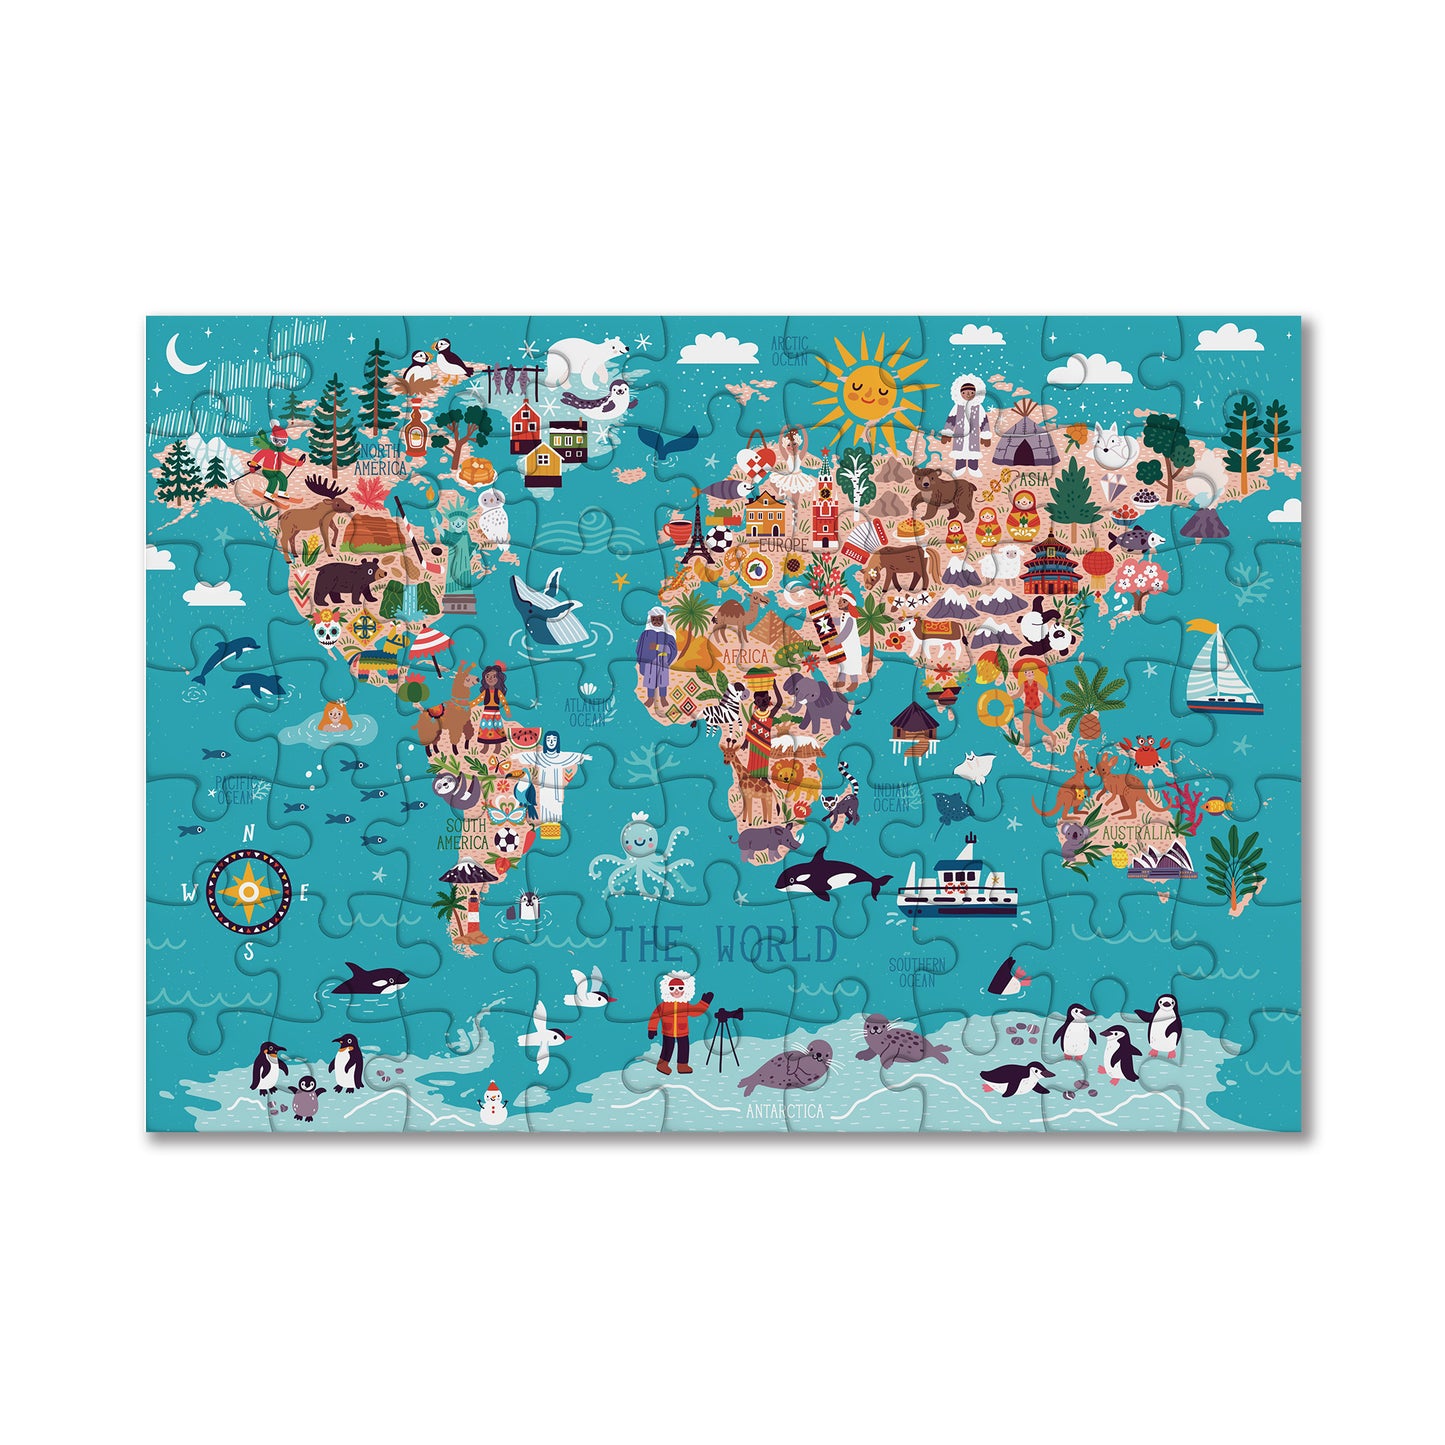 The World pictographic puzzle map